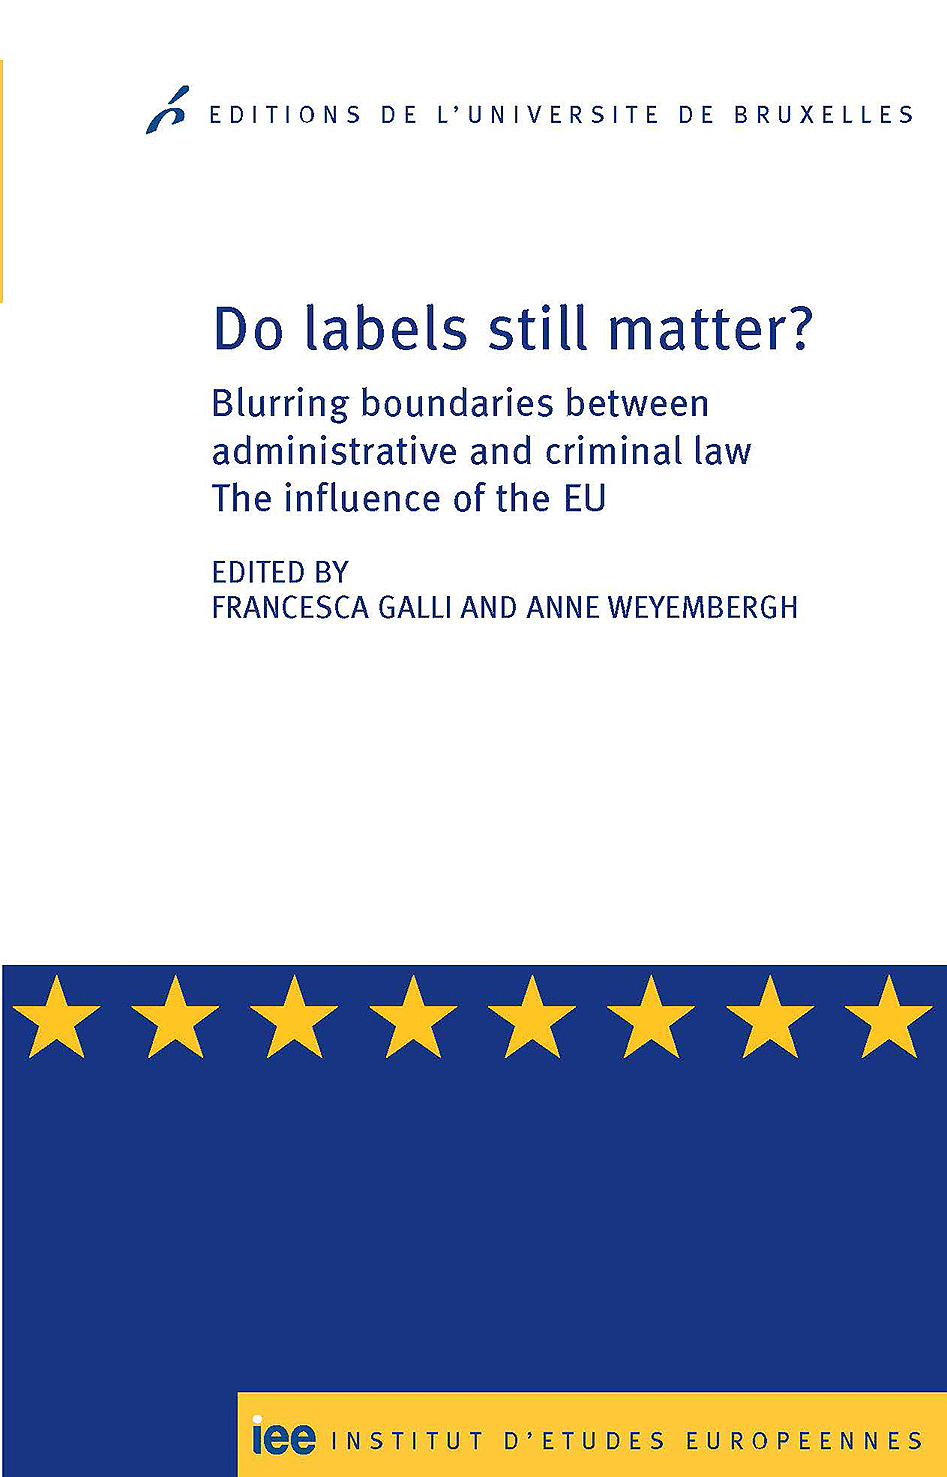 Do labels still matter? Blurring boundaries between administrative and criminal law. The influence of the EU 